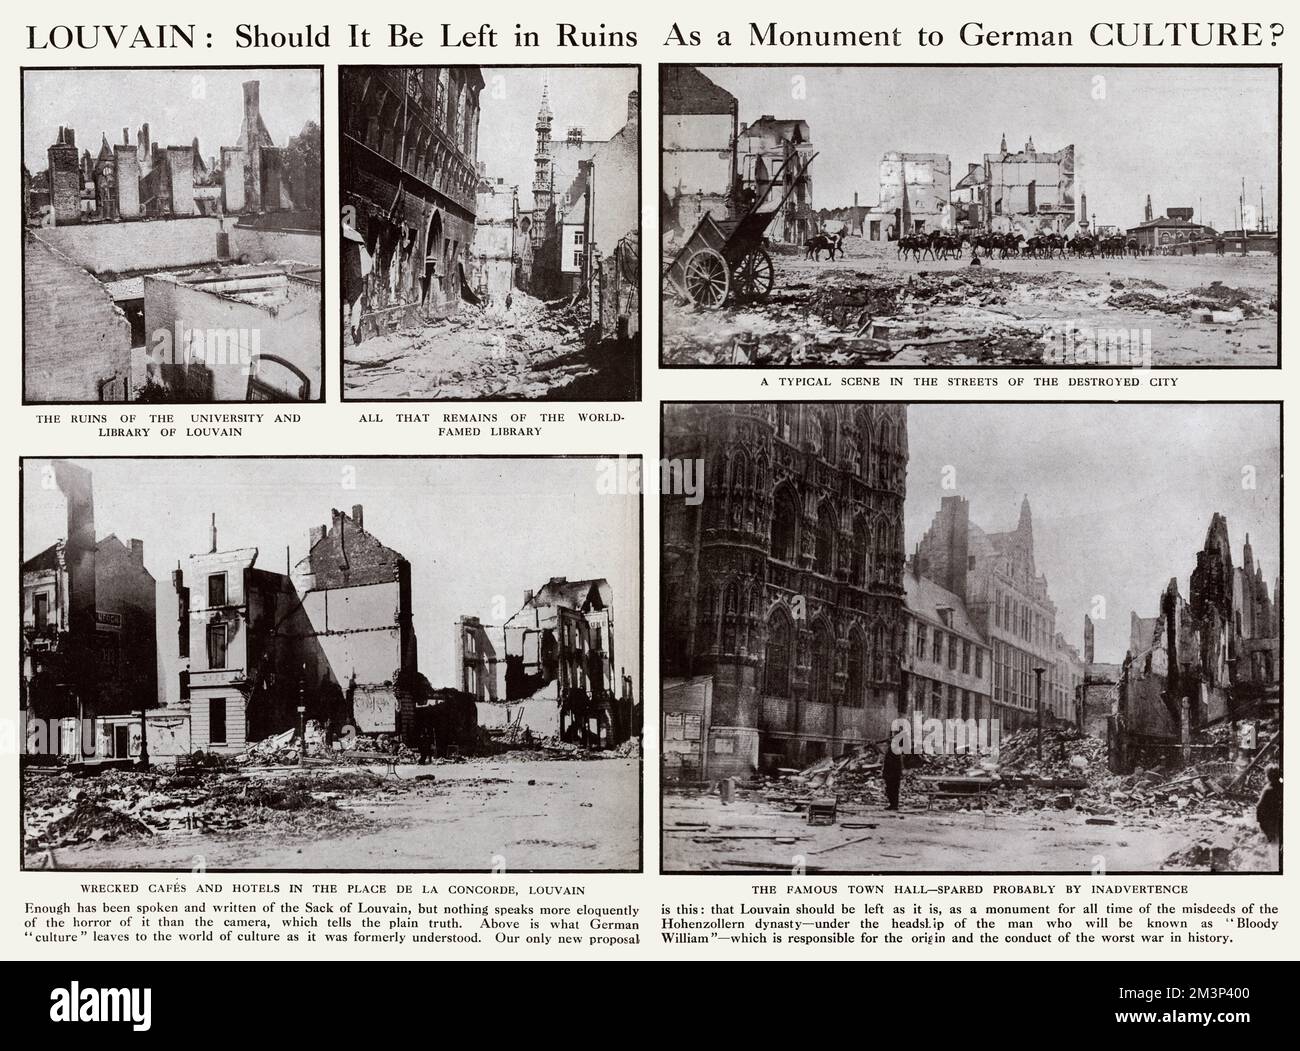 Scenes of devastation in Louvain, Belgium, in the early weeks of the First World War.  Showing the ruins of the university and library, a typical street scene, wrecked cafes and hotels in the Place de la Concorde, and the famous town hall one of the few buildings left standing.       Date: 1914 Stock Photo